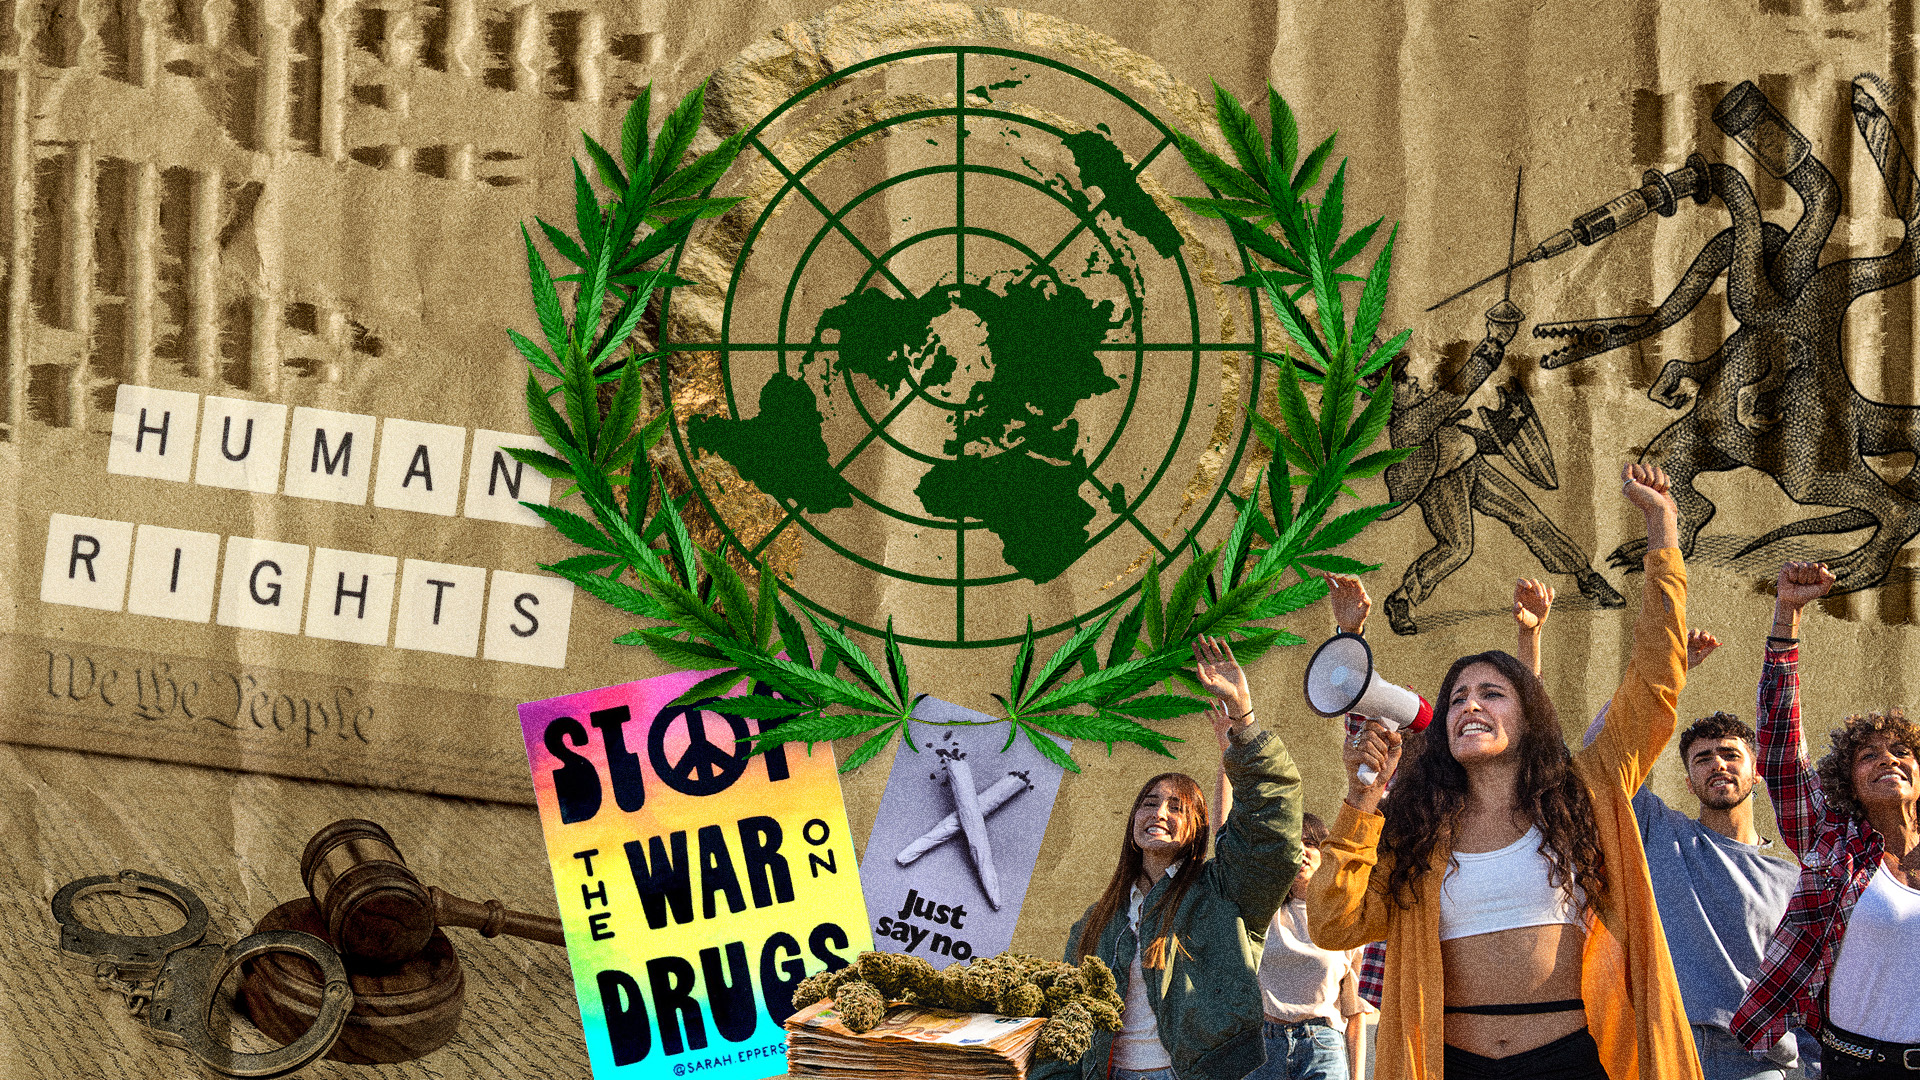 UN Report: Drug Policies Should Protect Human Rights, Reduce Harm